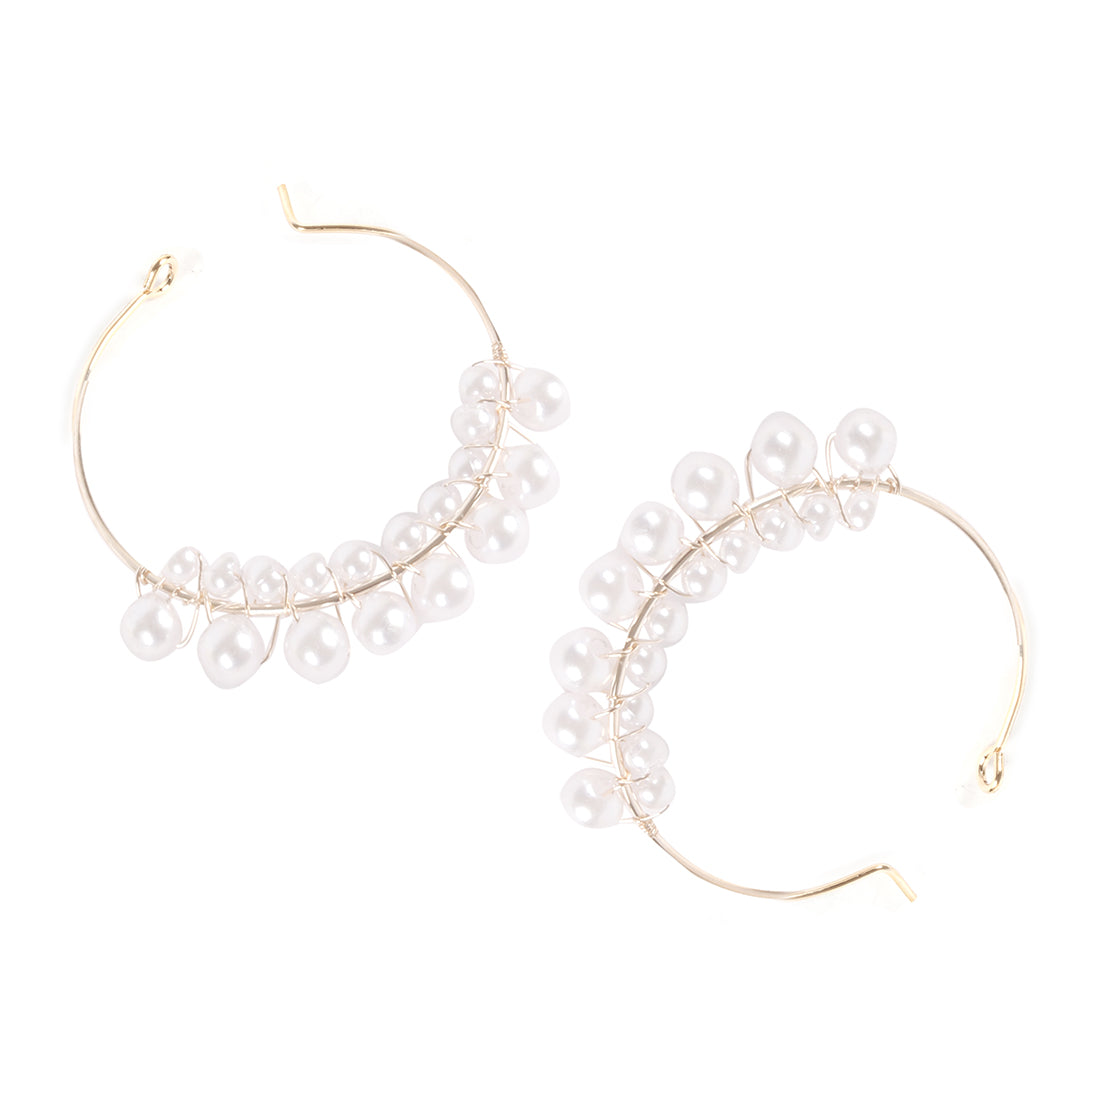 OVERSIZED PEARL STUDDED GOLD-TONED CIRCULAR HOOP EARRINGS